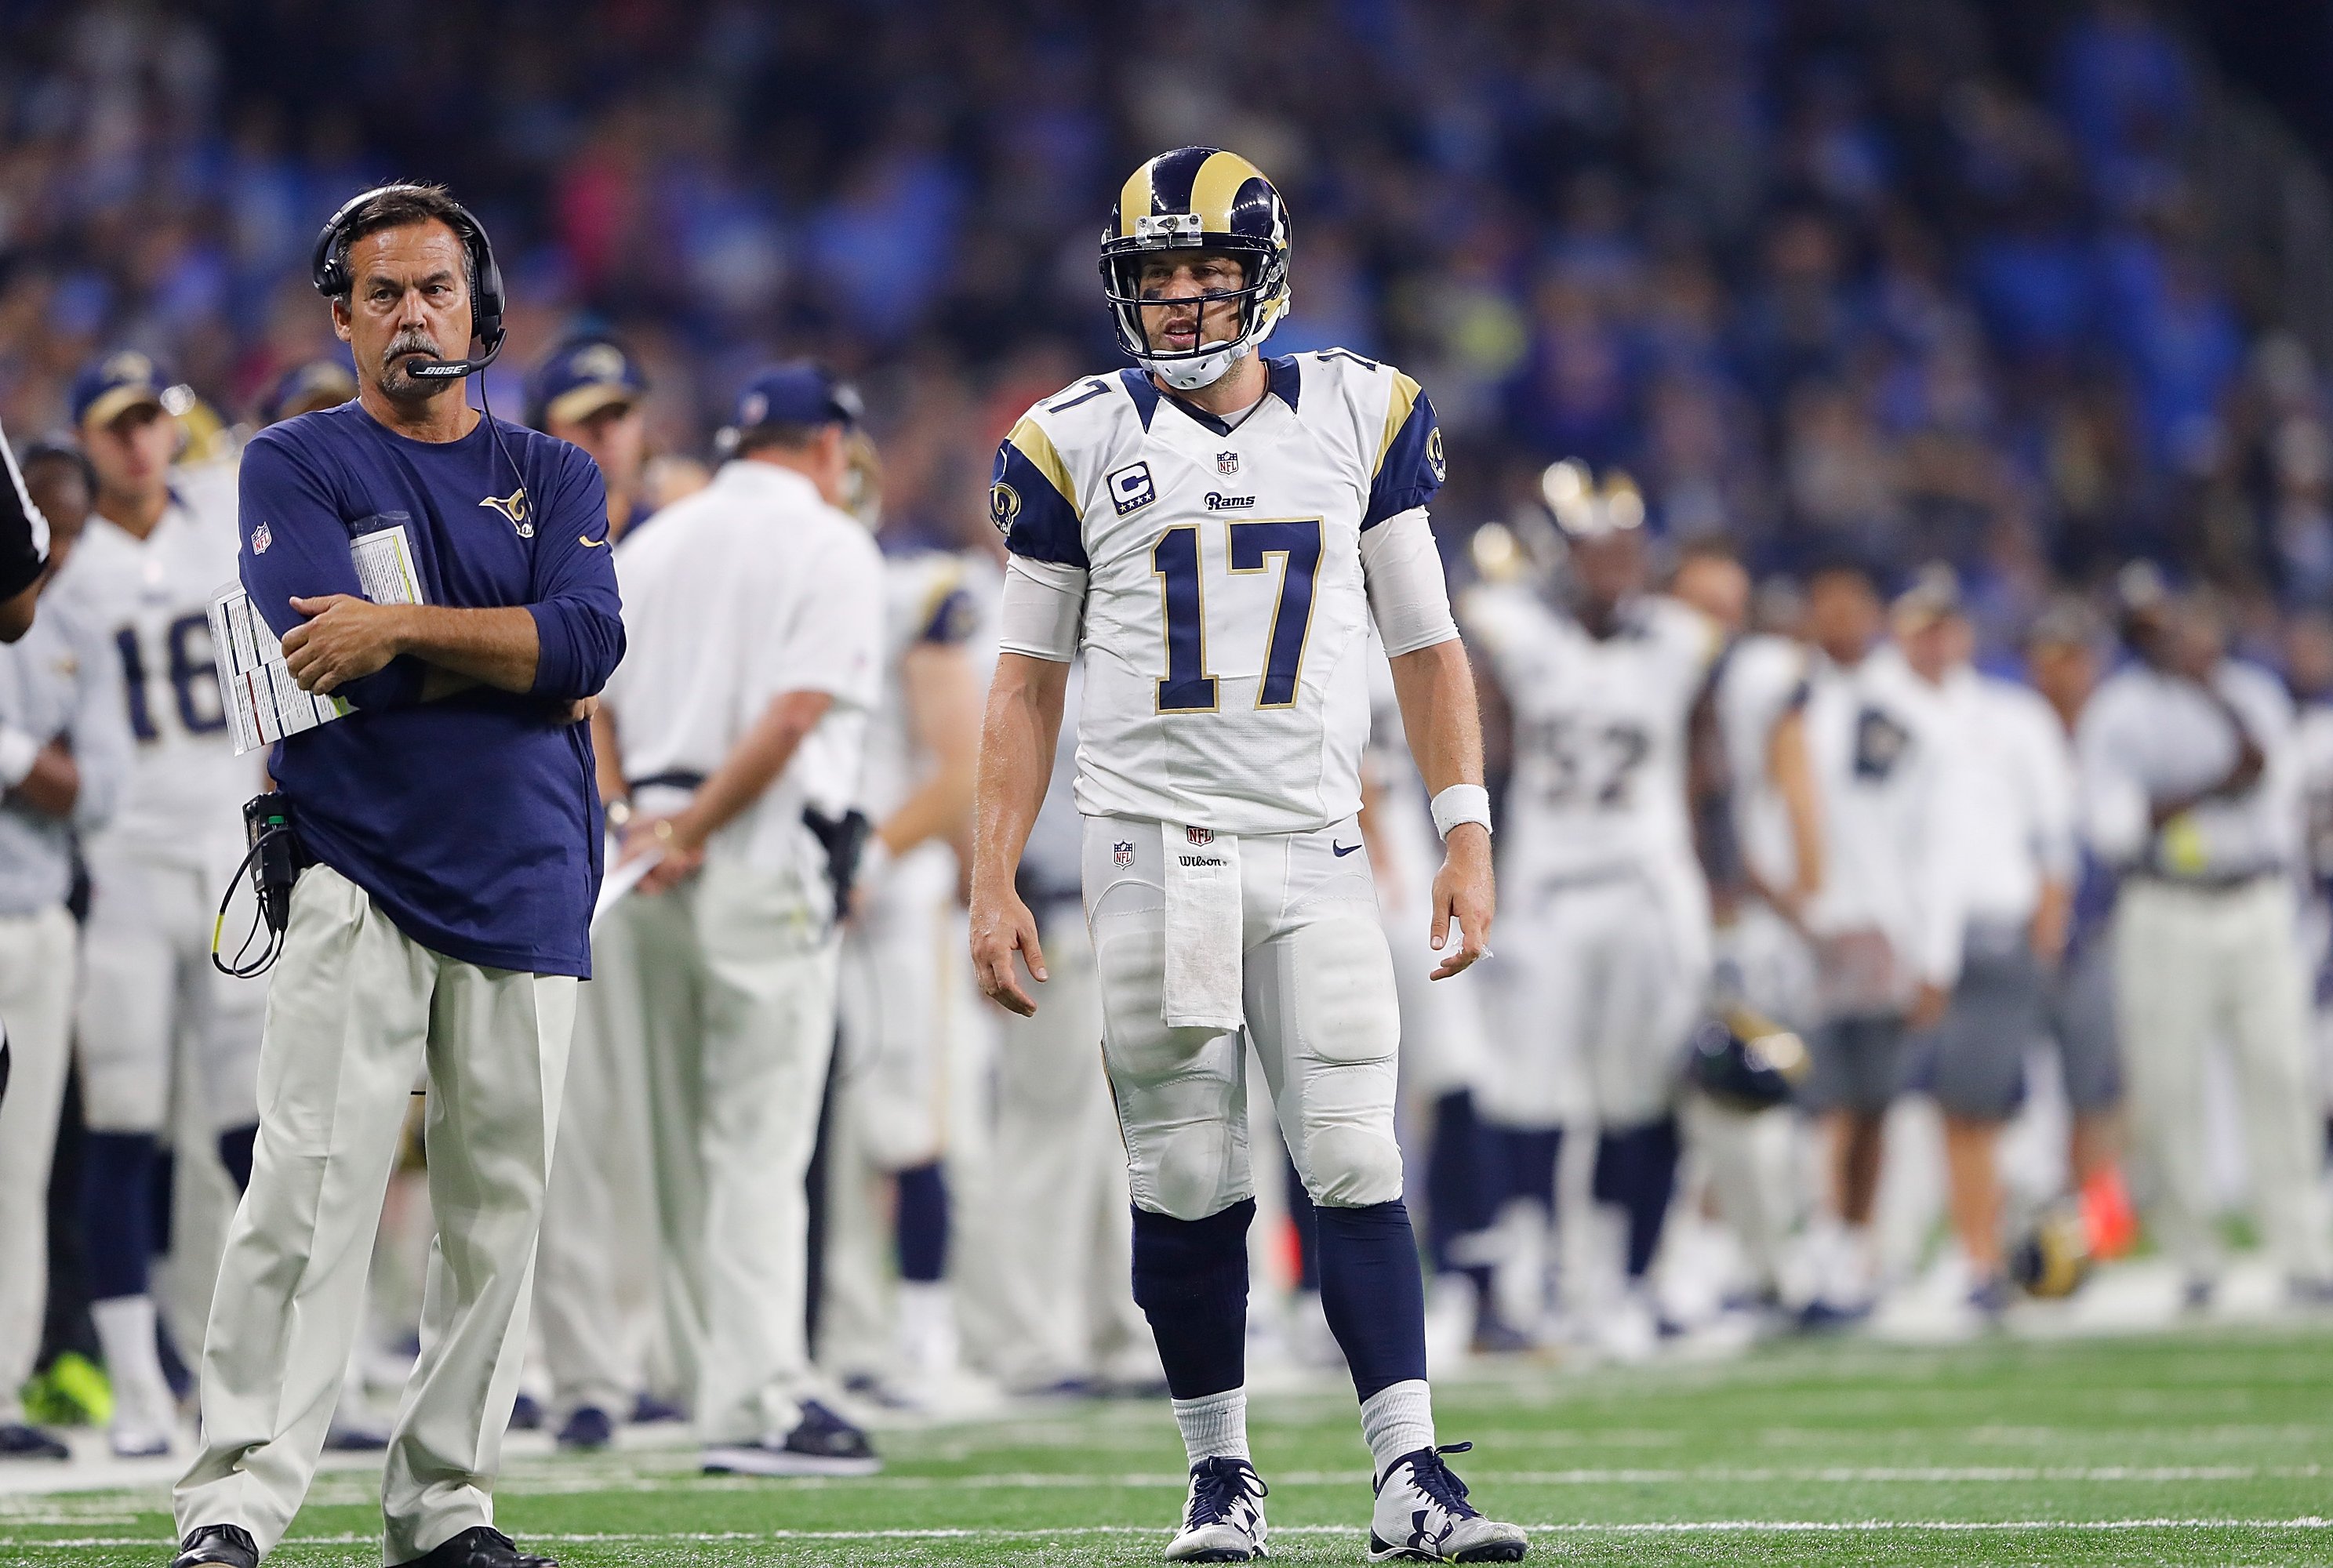 NFC West roundup: Rams falter, Seahawks take division lead